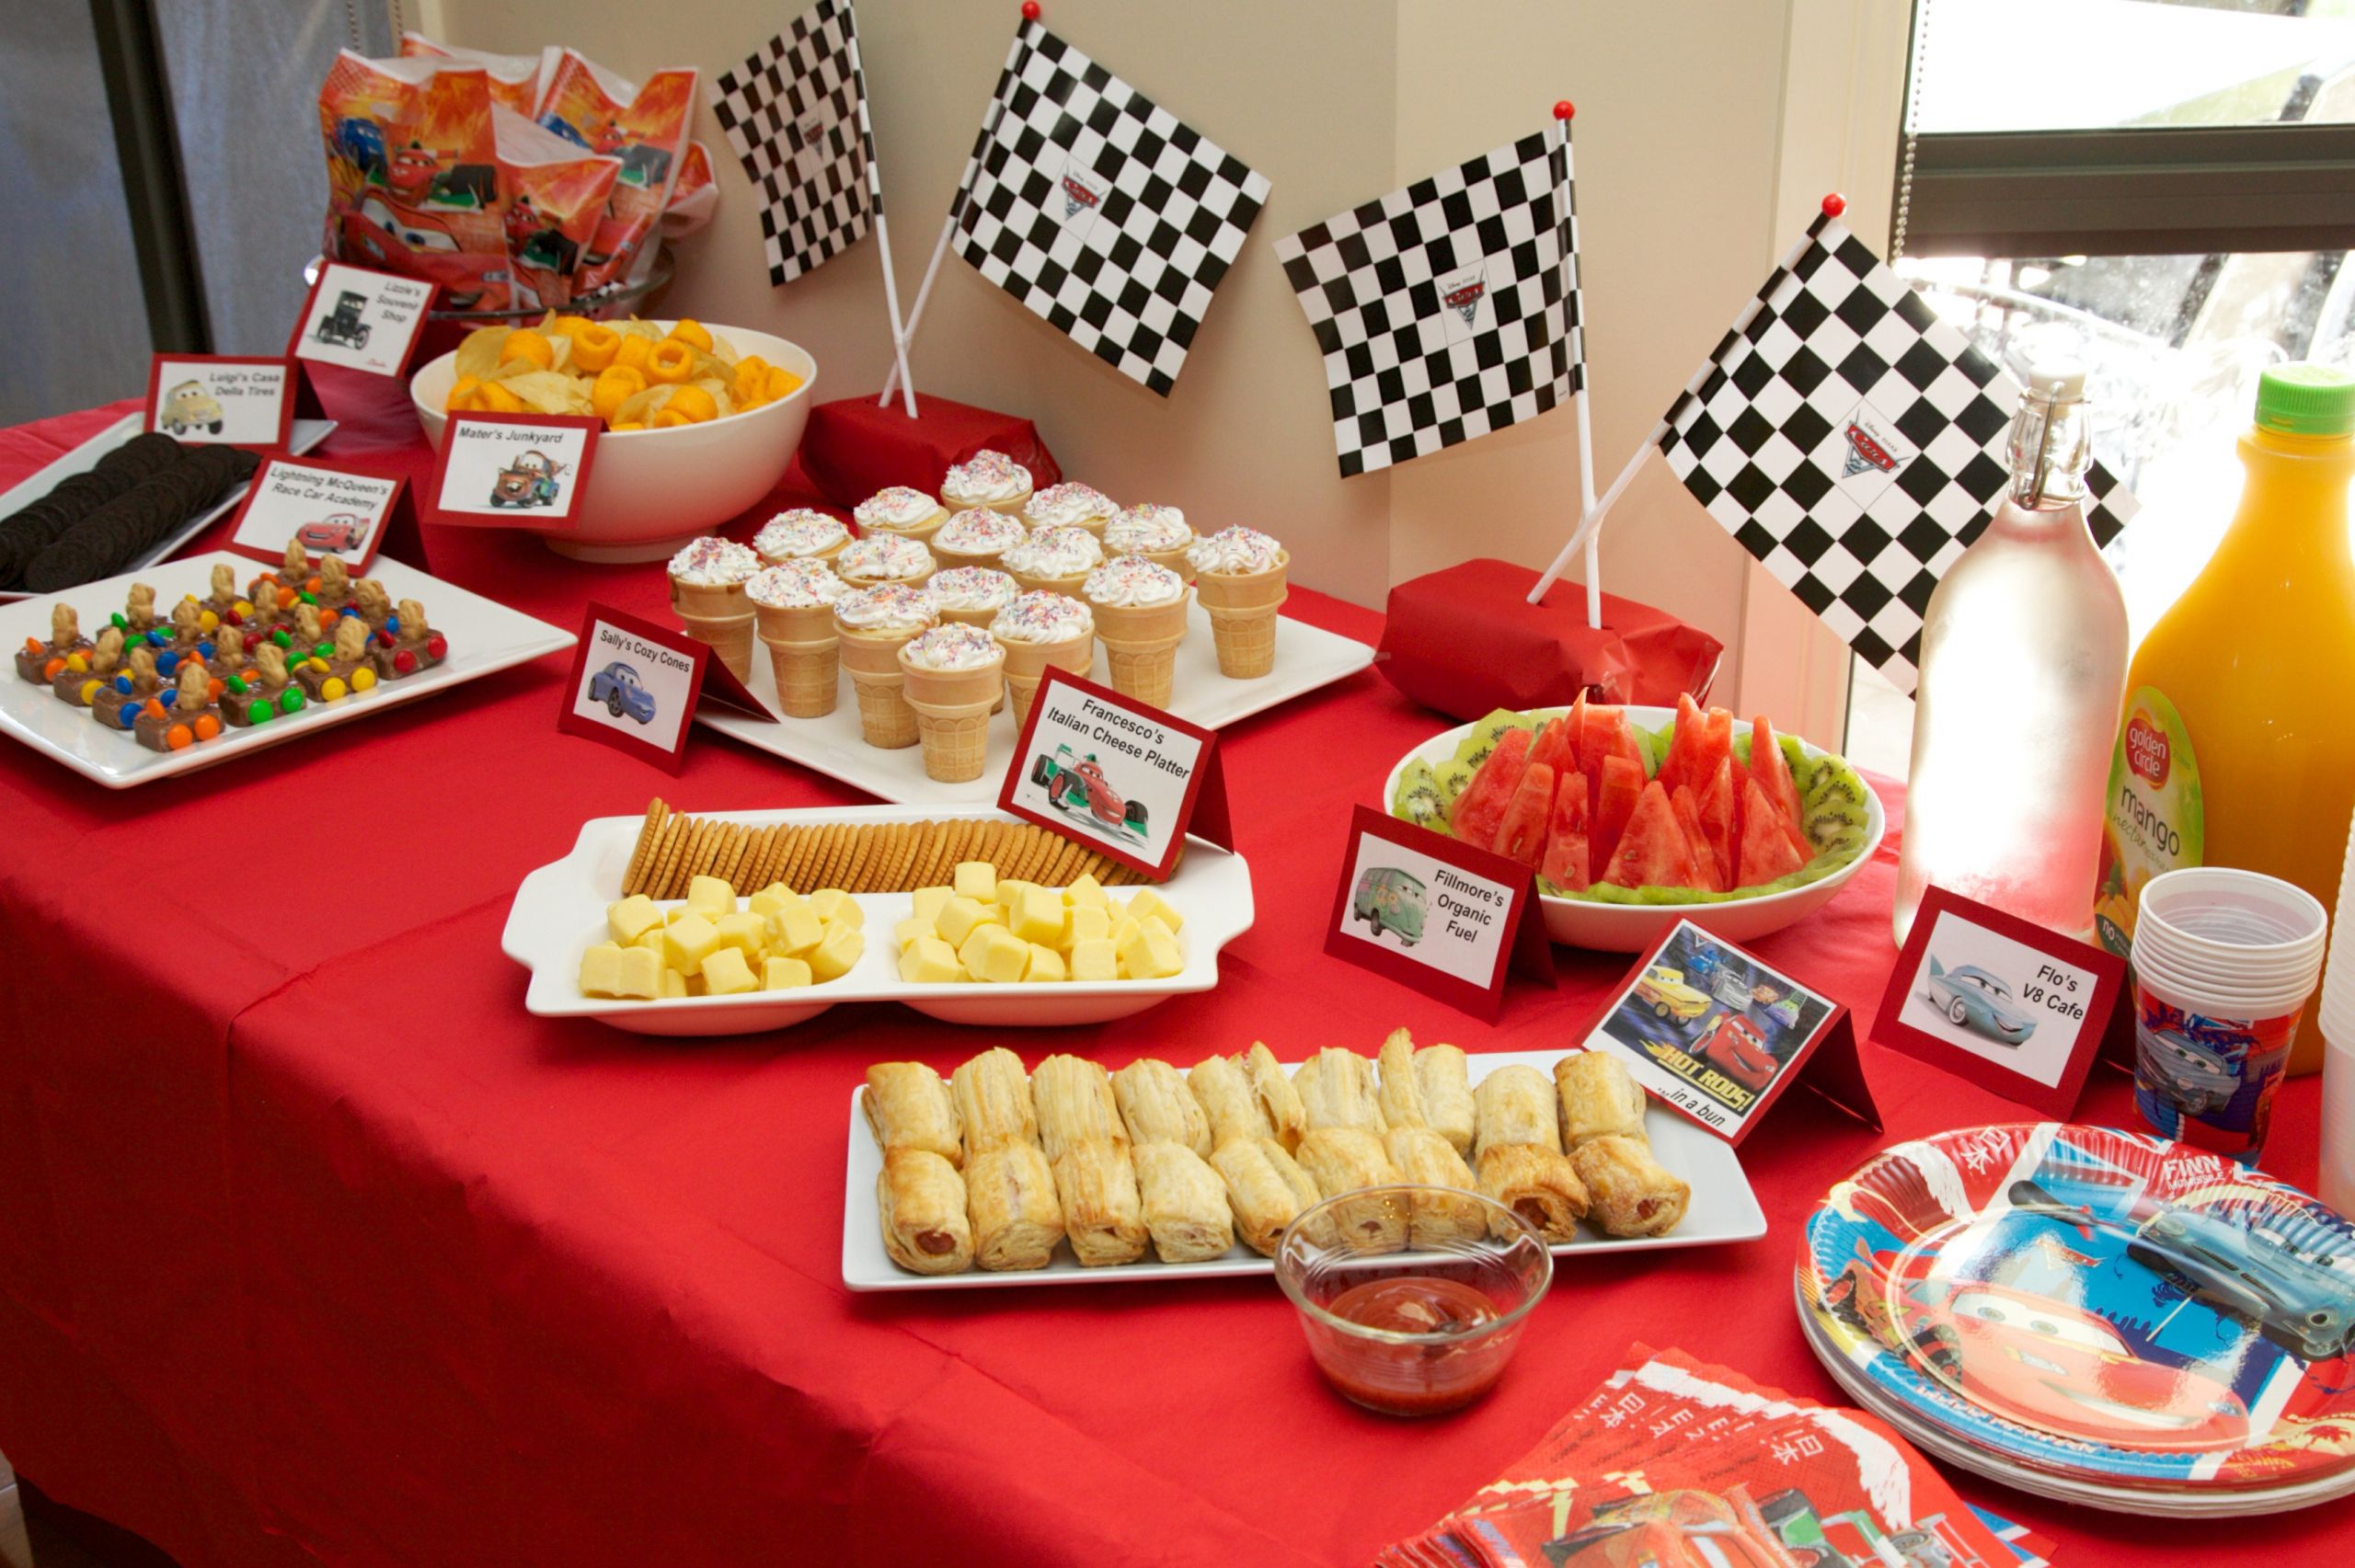 Kids Bday Party Snacks
 How to throw a BIG kids birthday party on a small bud